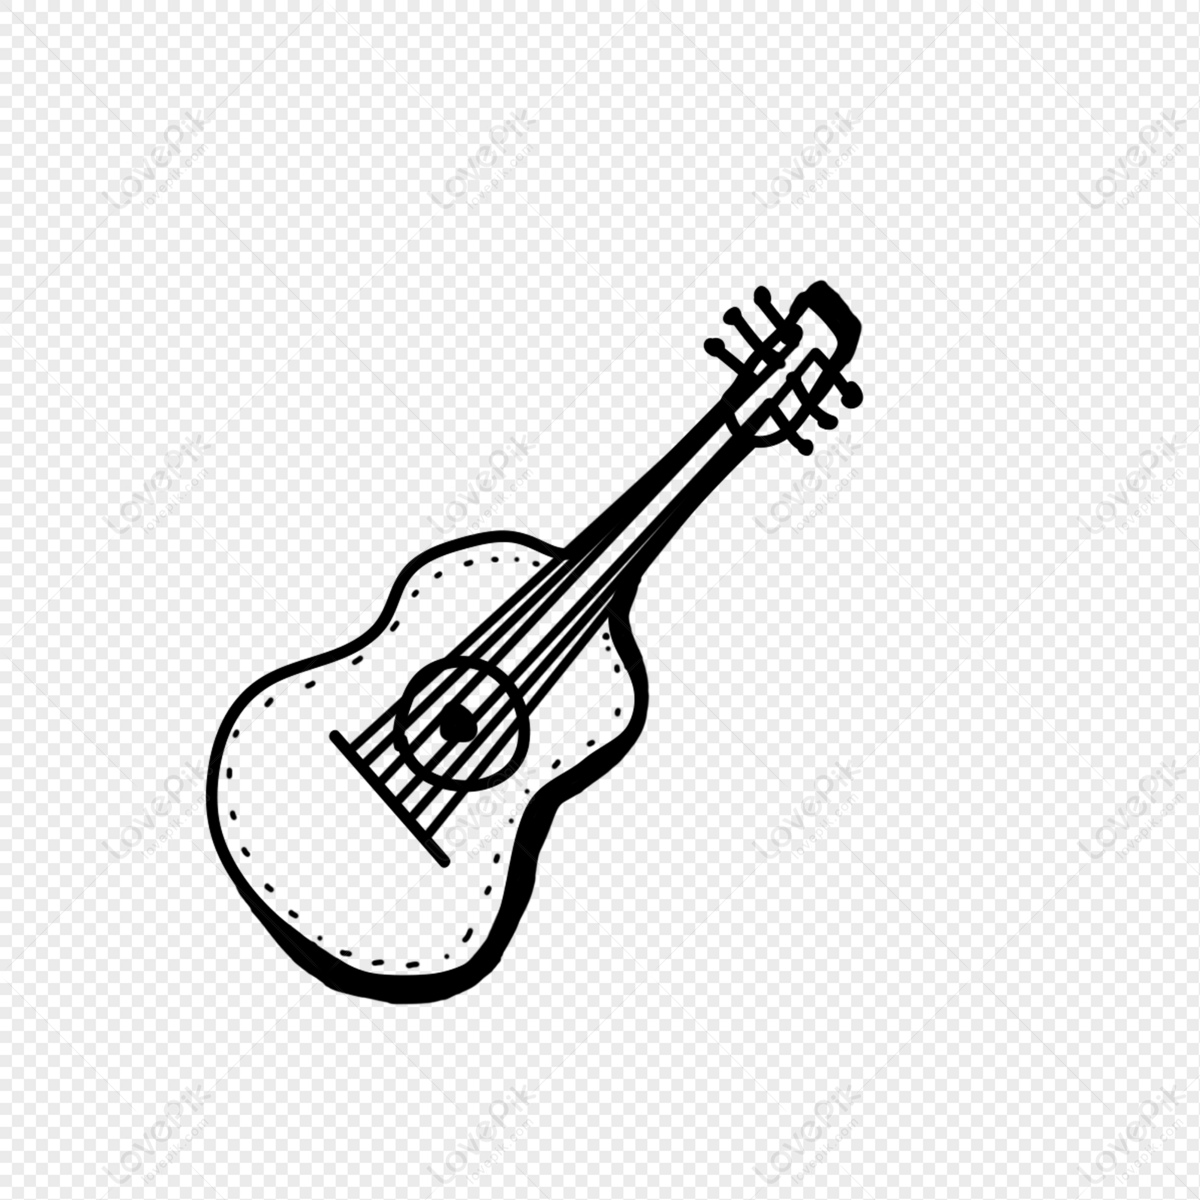 guitar-stick-figure-png-transparent-image-and-clipart-image-for-free